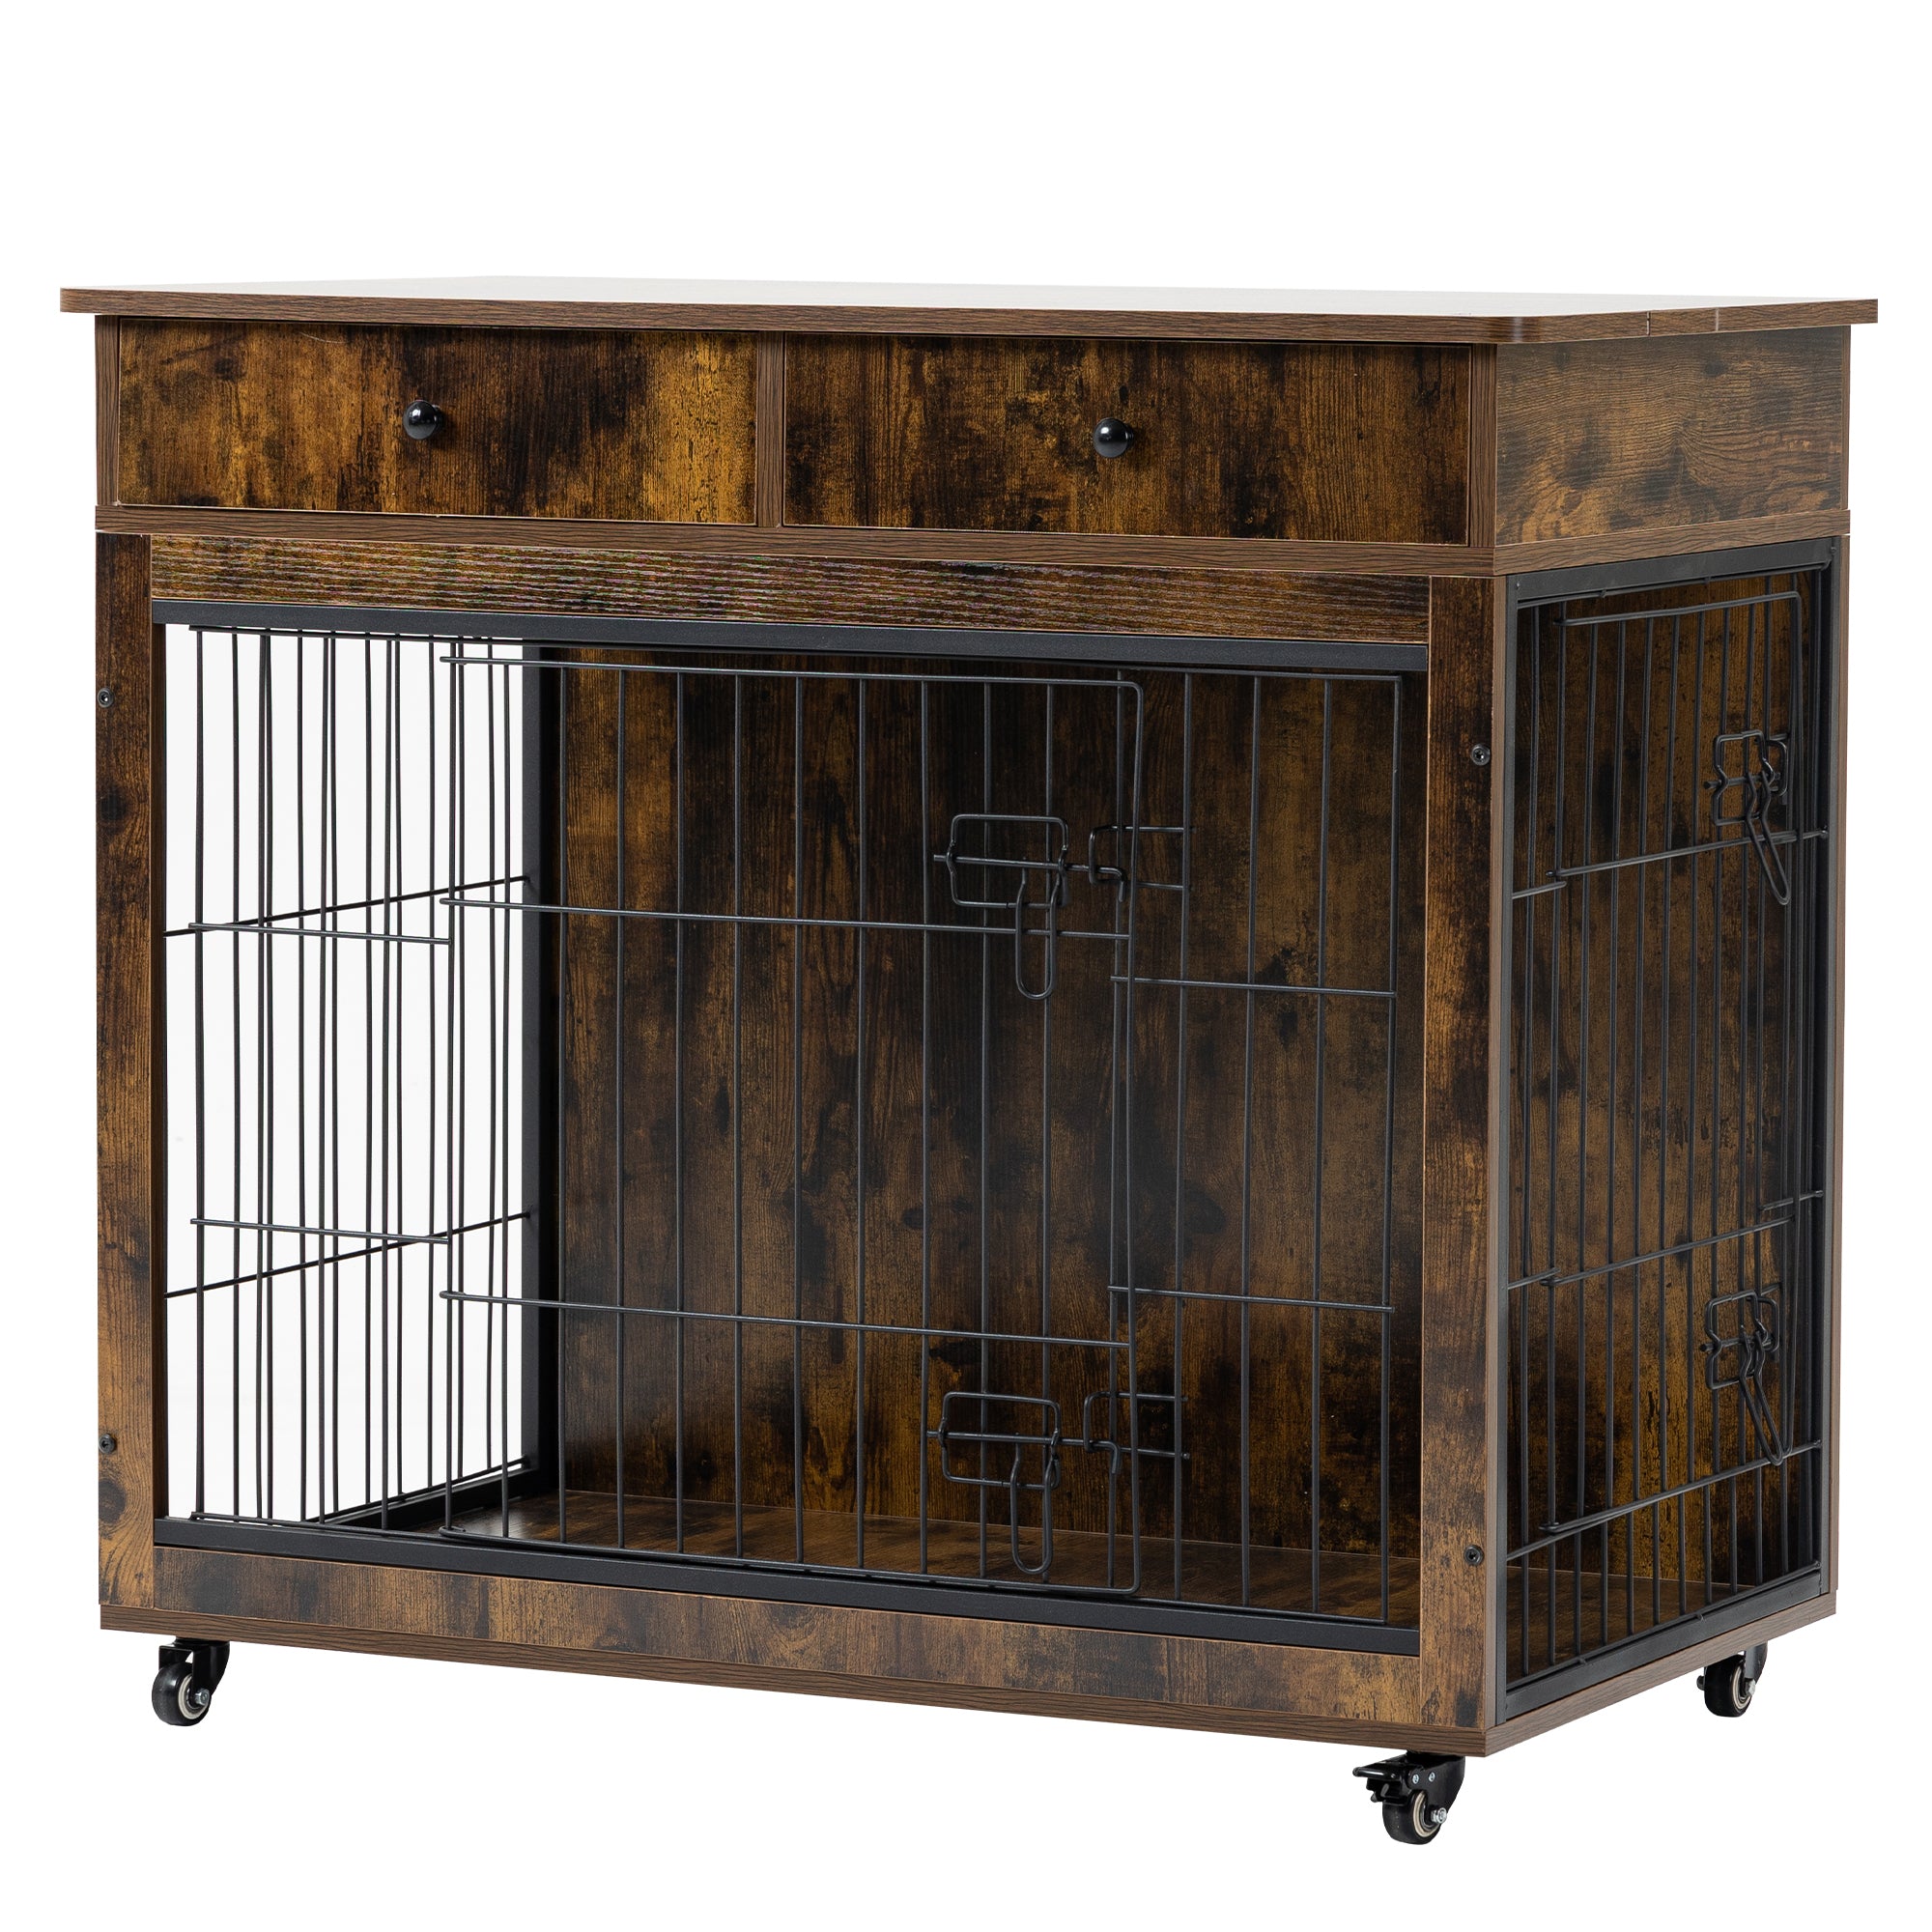 🆓🚛 Dog Crate Furniture, Wooden Dog Crate End Table, 38.4" Dog Kennel With 2 Drawers Storage, Heavy Duty Dog Crate, Decorative Pet Crate Dog Cage for Large Indoor Use (Rustic Brown) 38.4" L×23.2" W×35